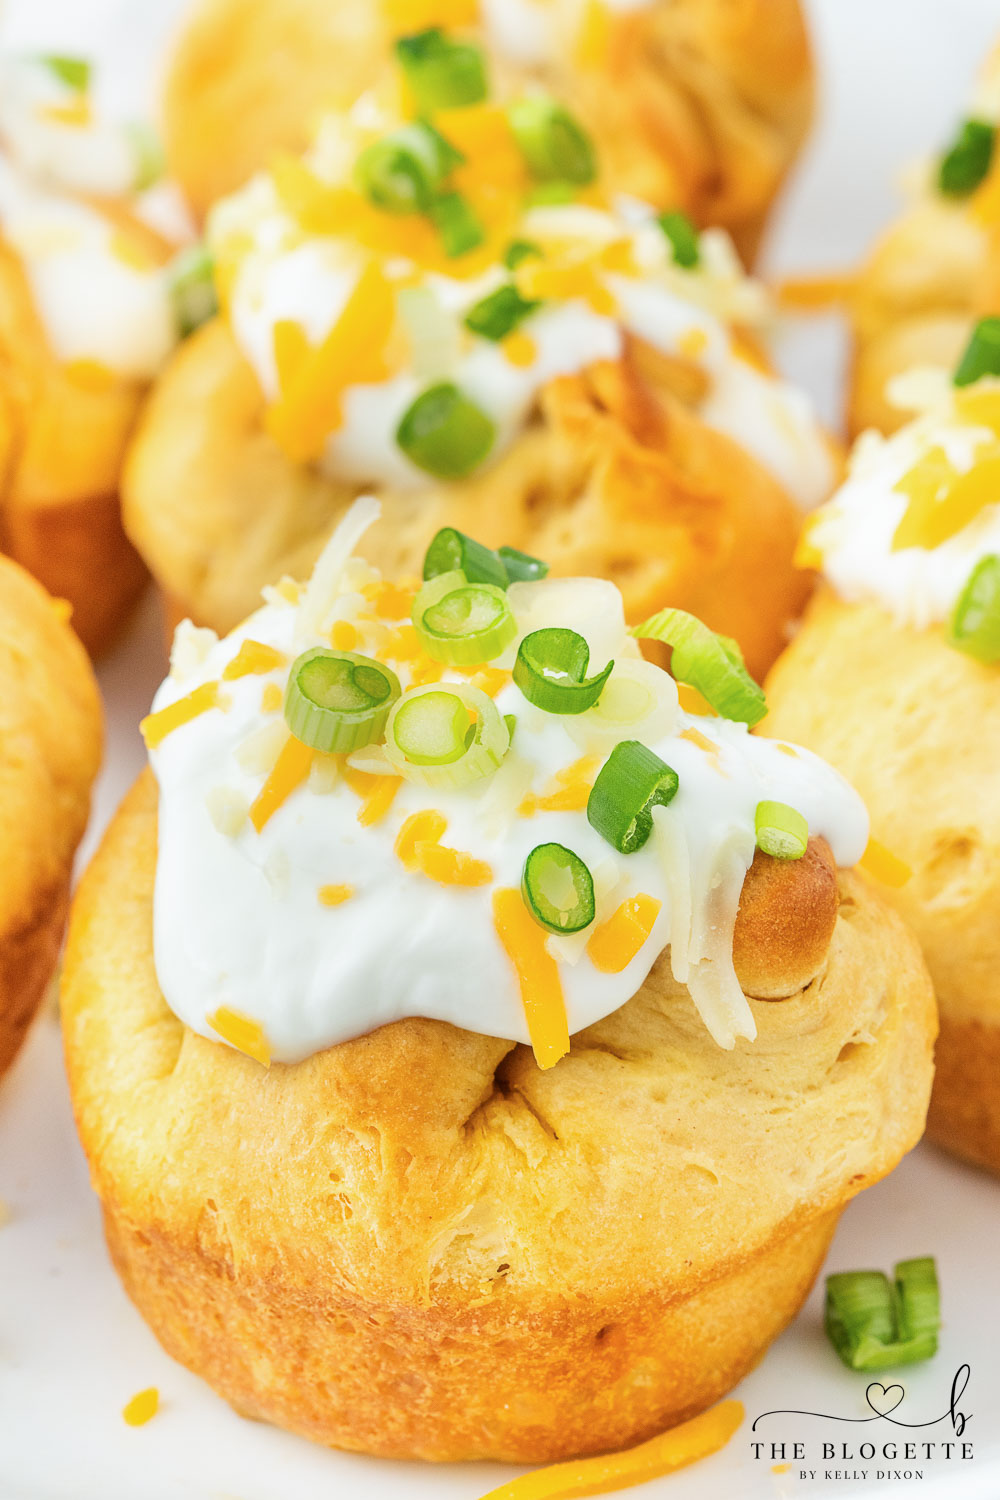 Chili stuffed rolls! Buttery biscuits surrounding chili and cheese, topped with sour cream and green onions.